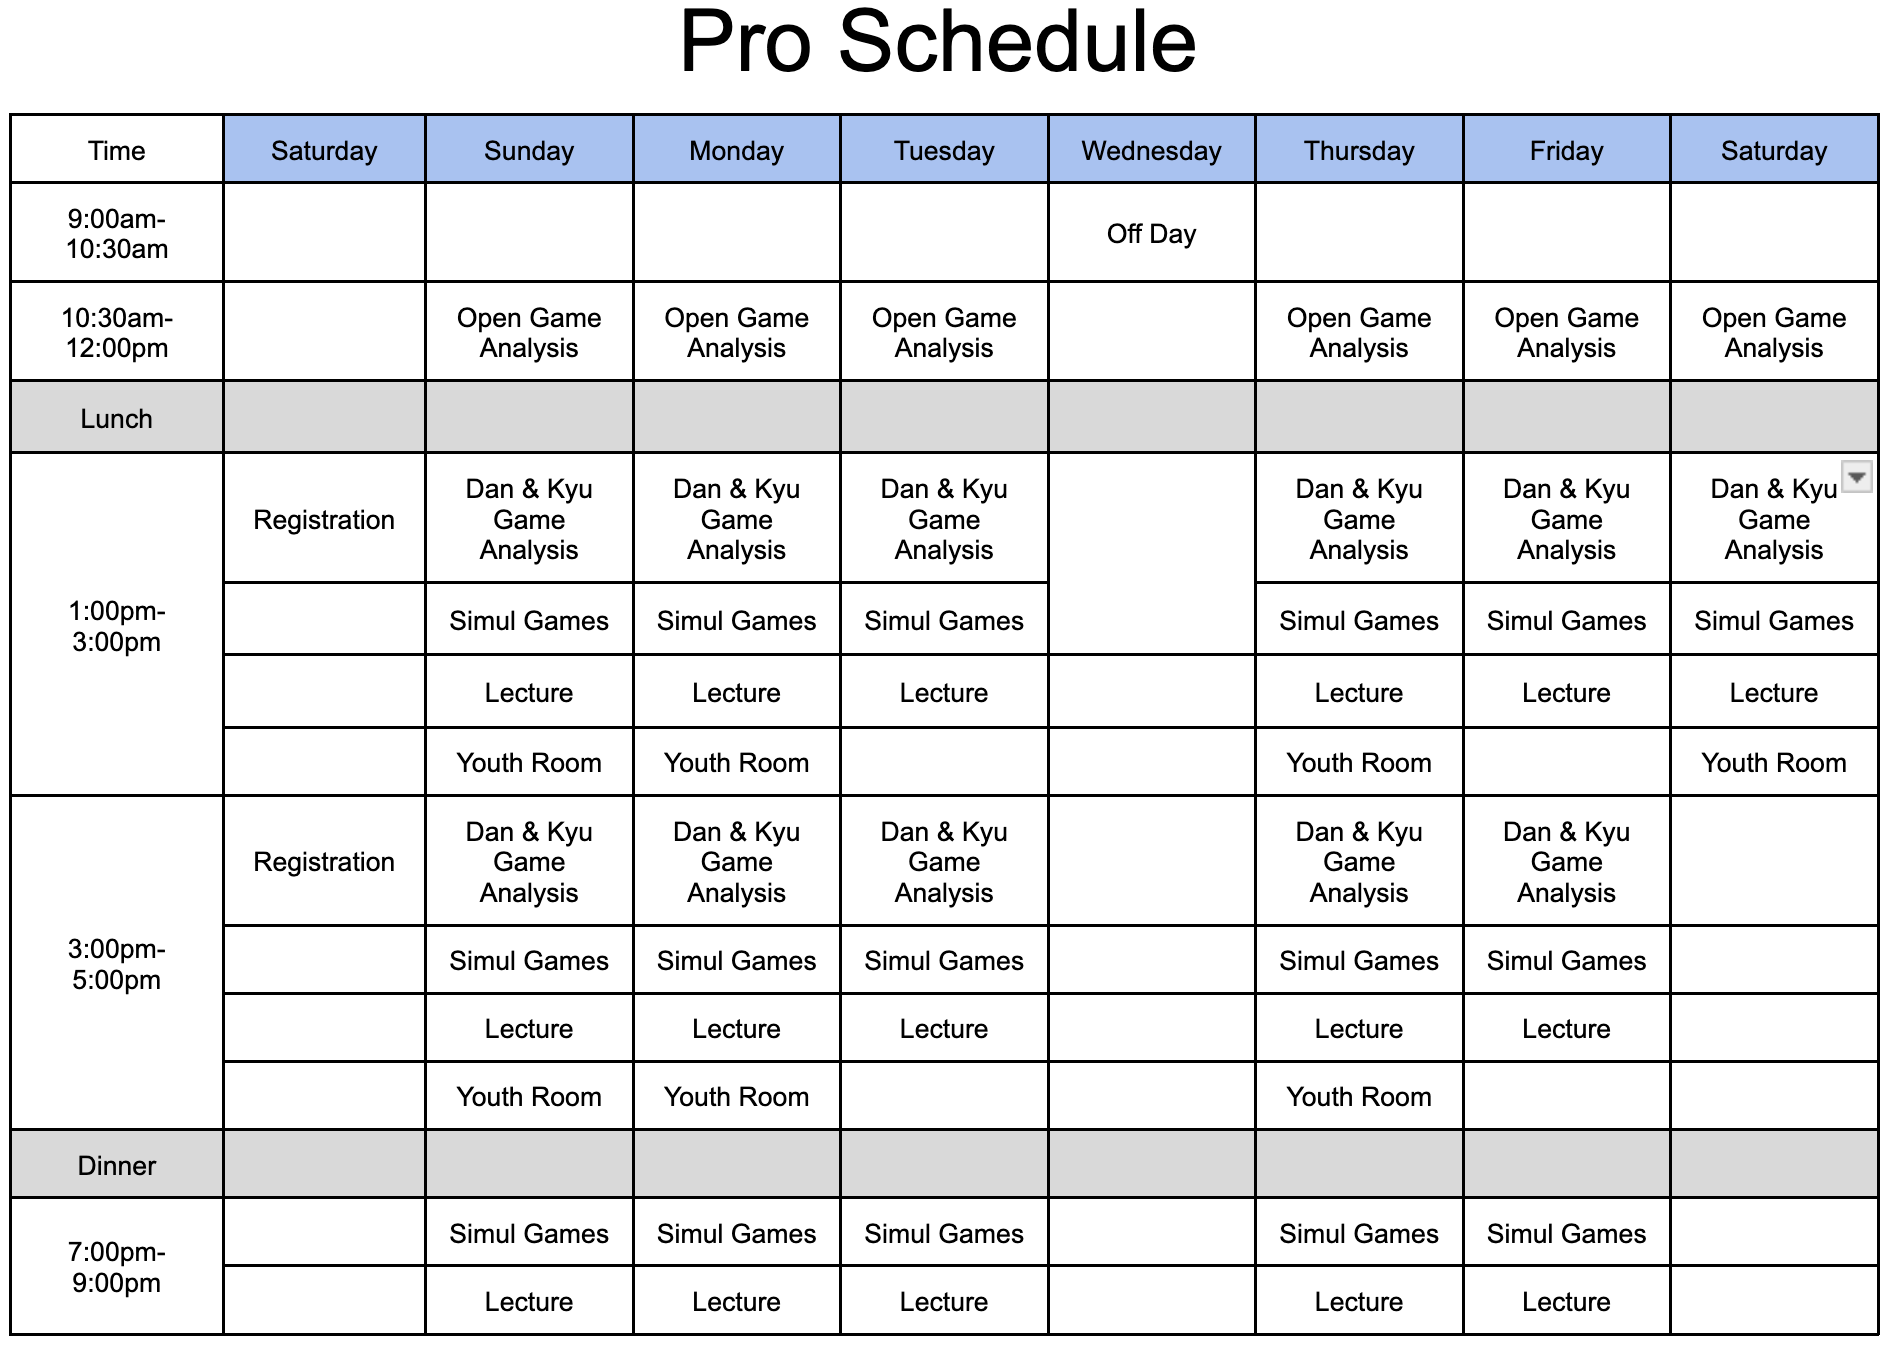 Pro_Schedule.png